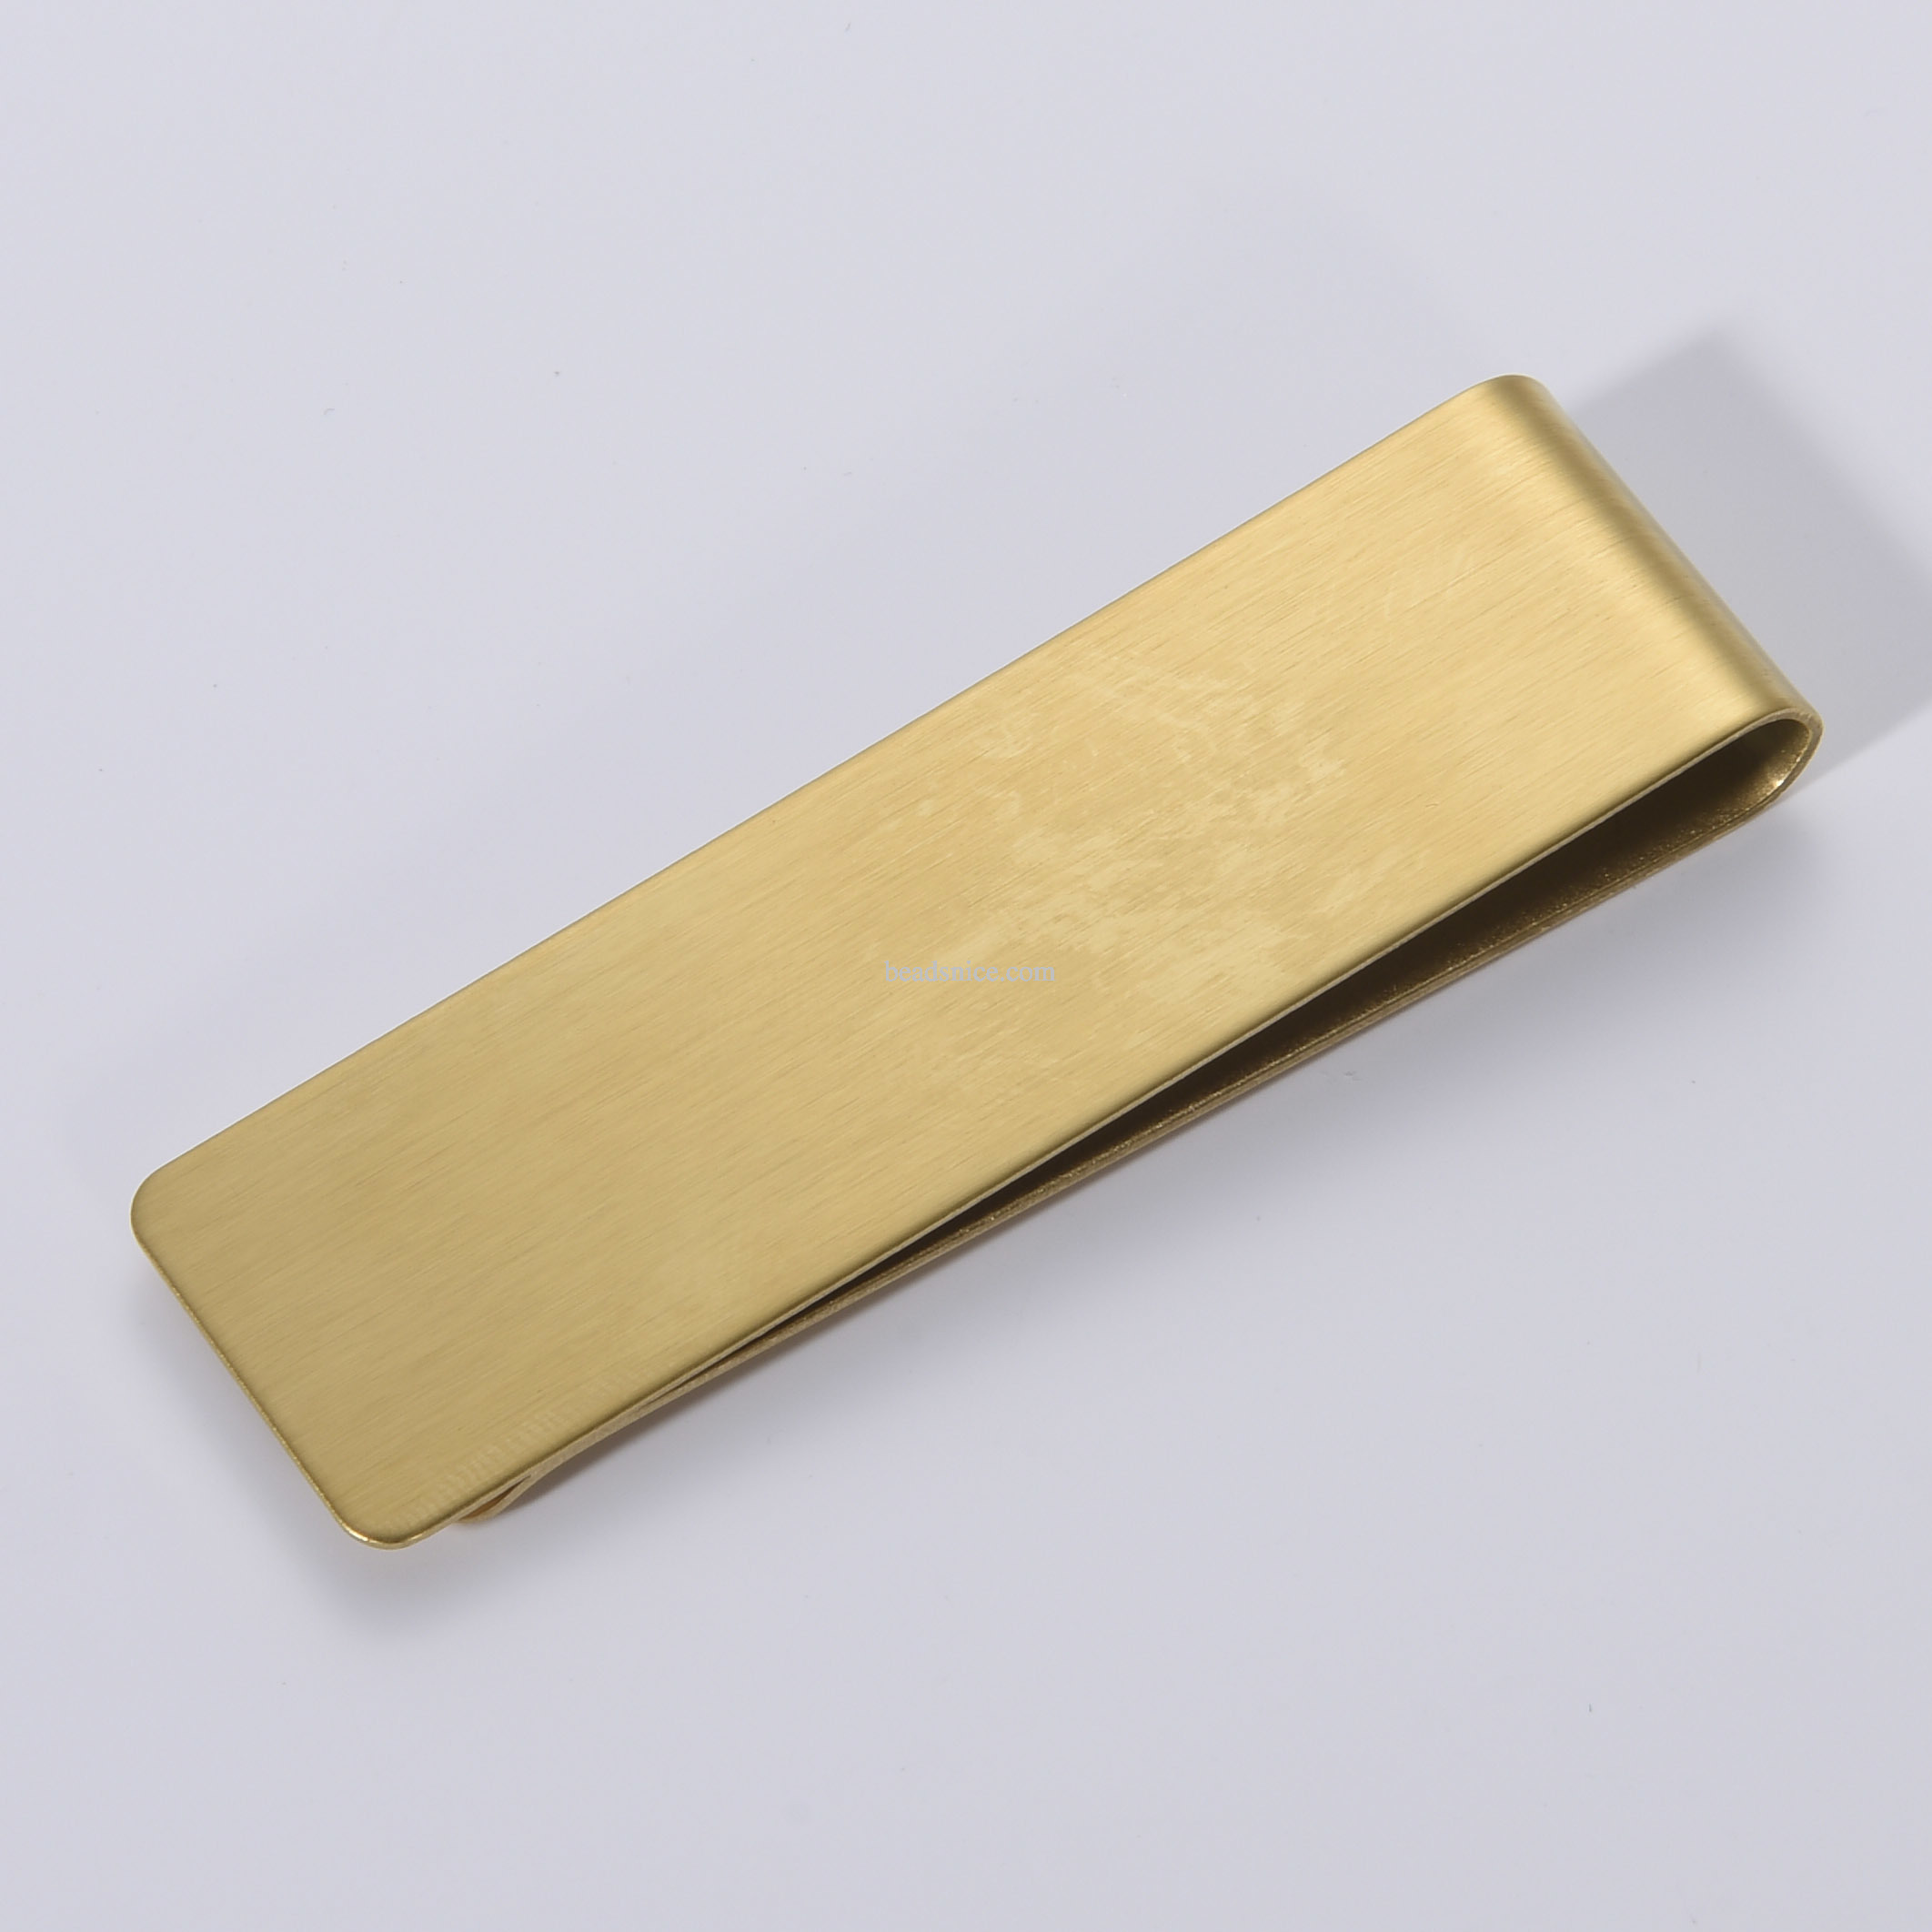 Stainless Steel Money clip jewelry findings fashion design clip perfect for Christmas Day gift